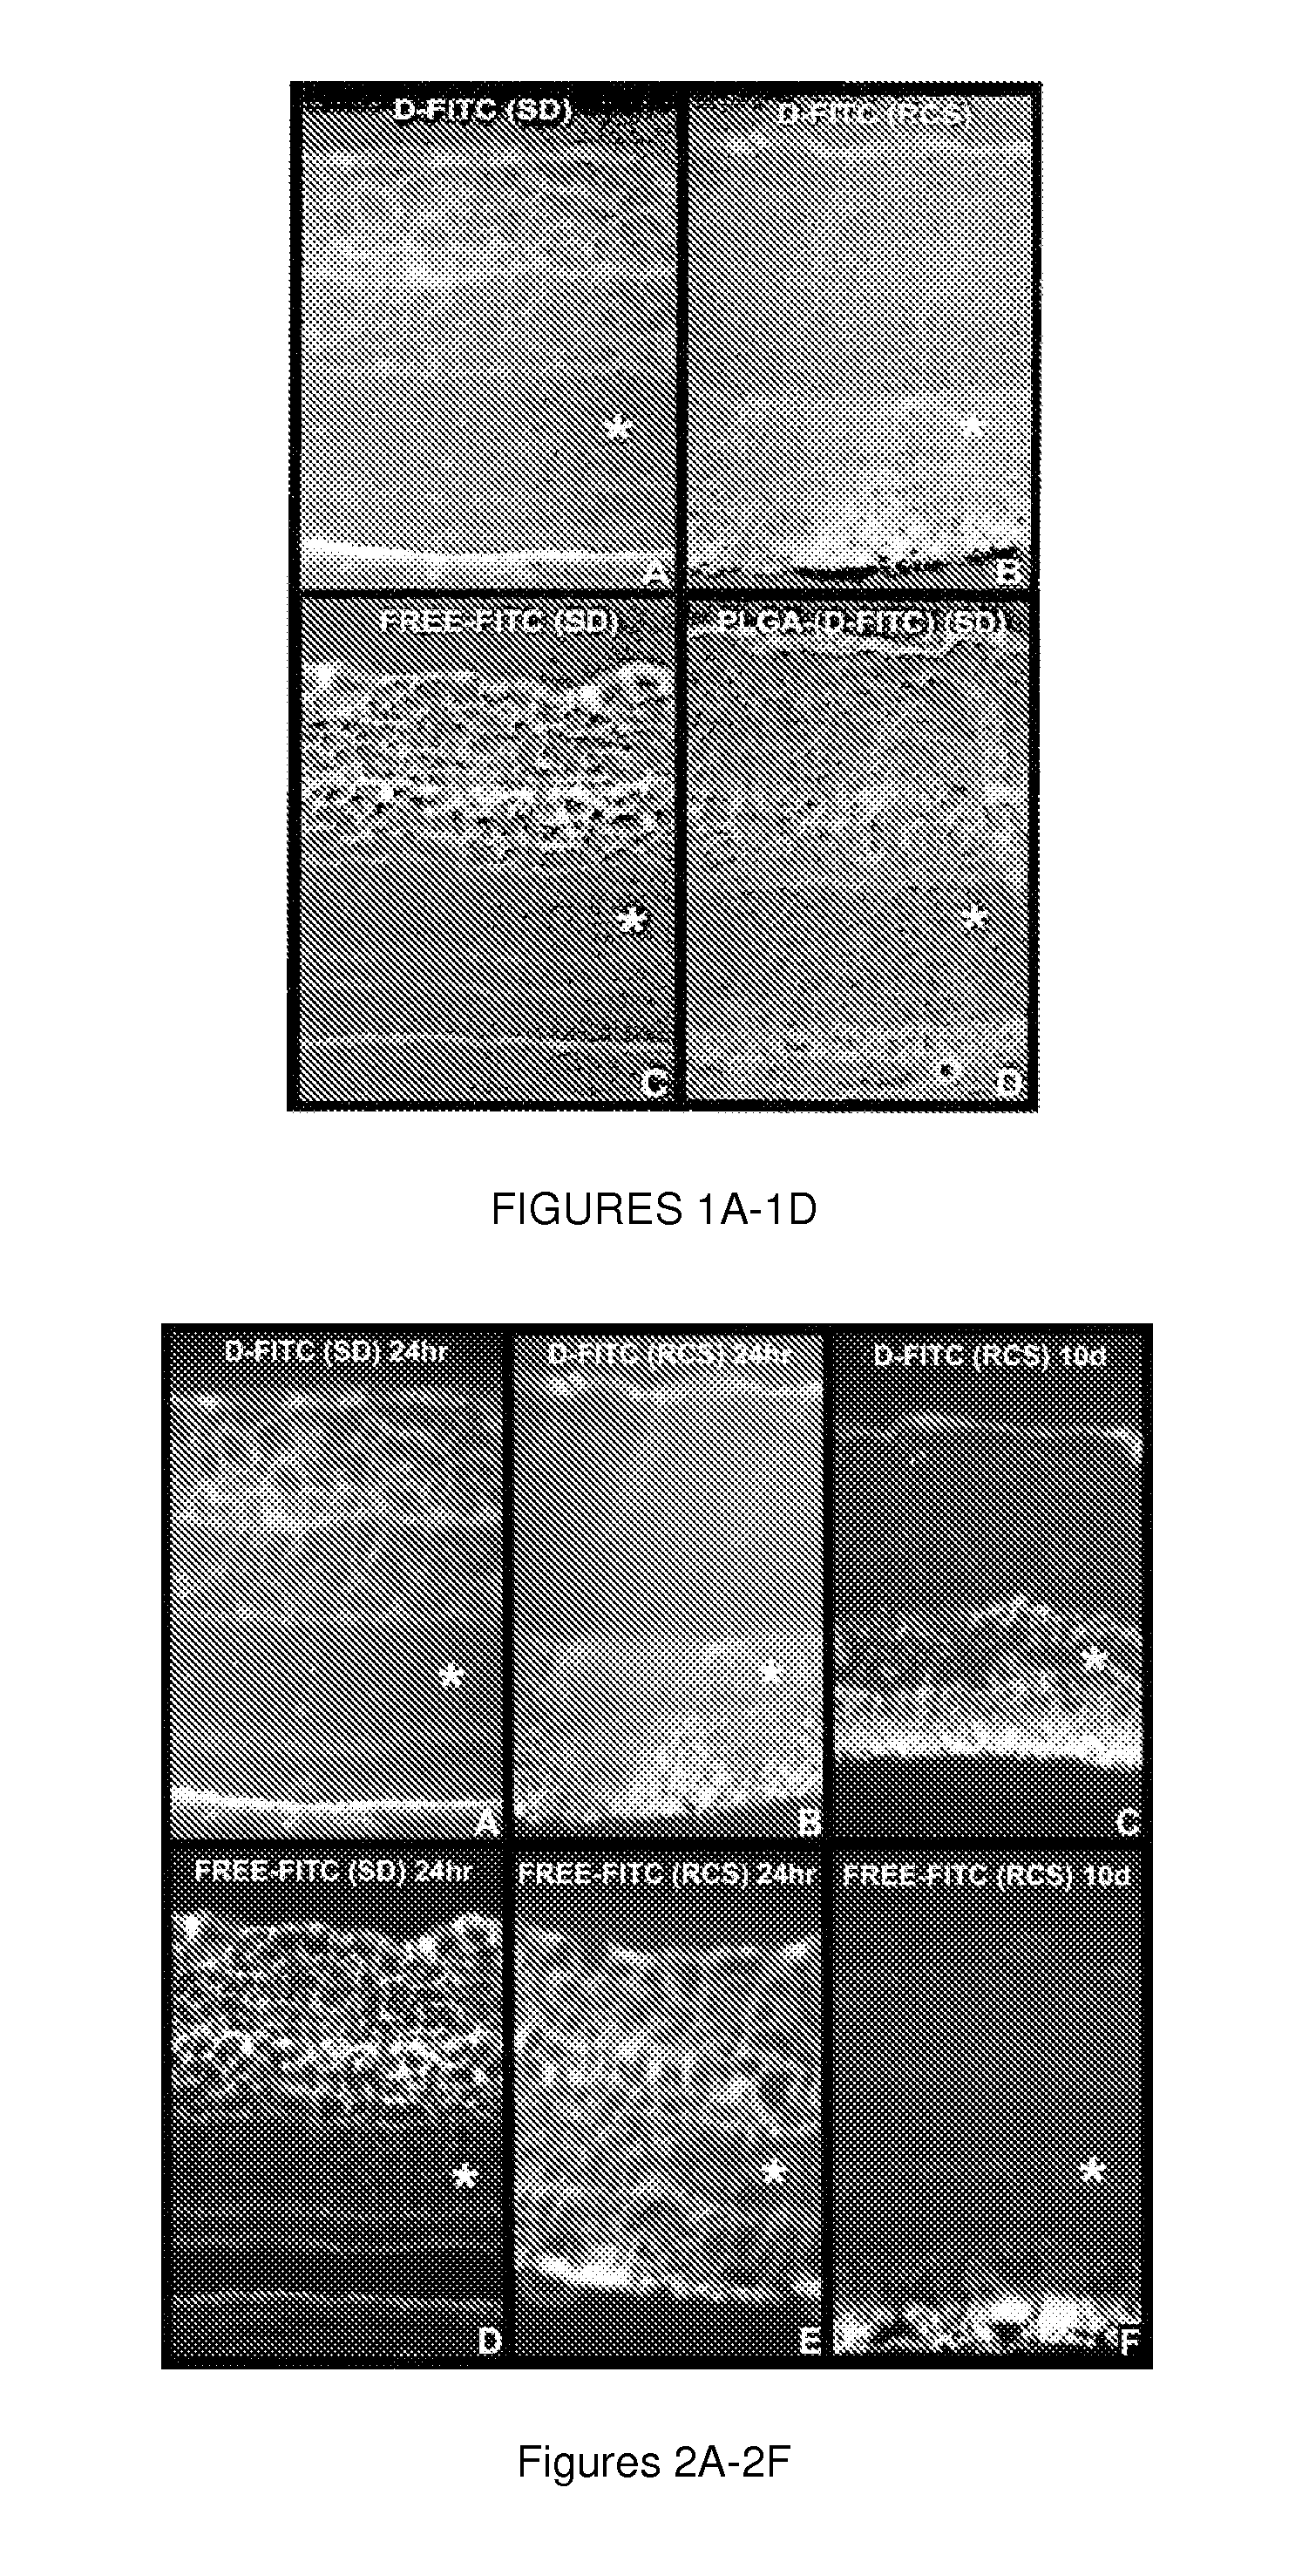 Dendrimers for sustained release of compounds